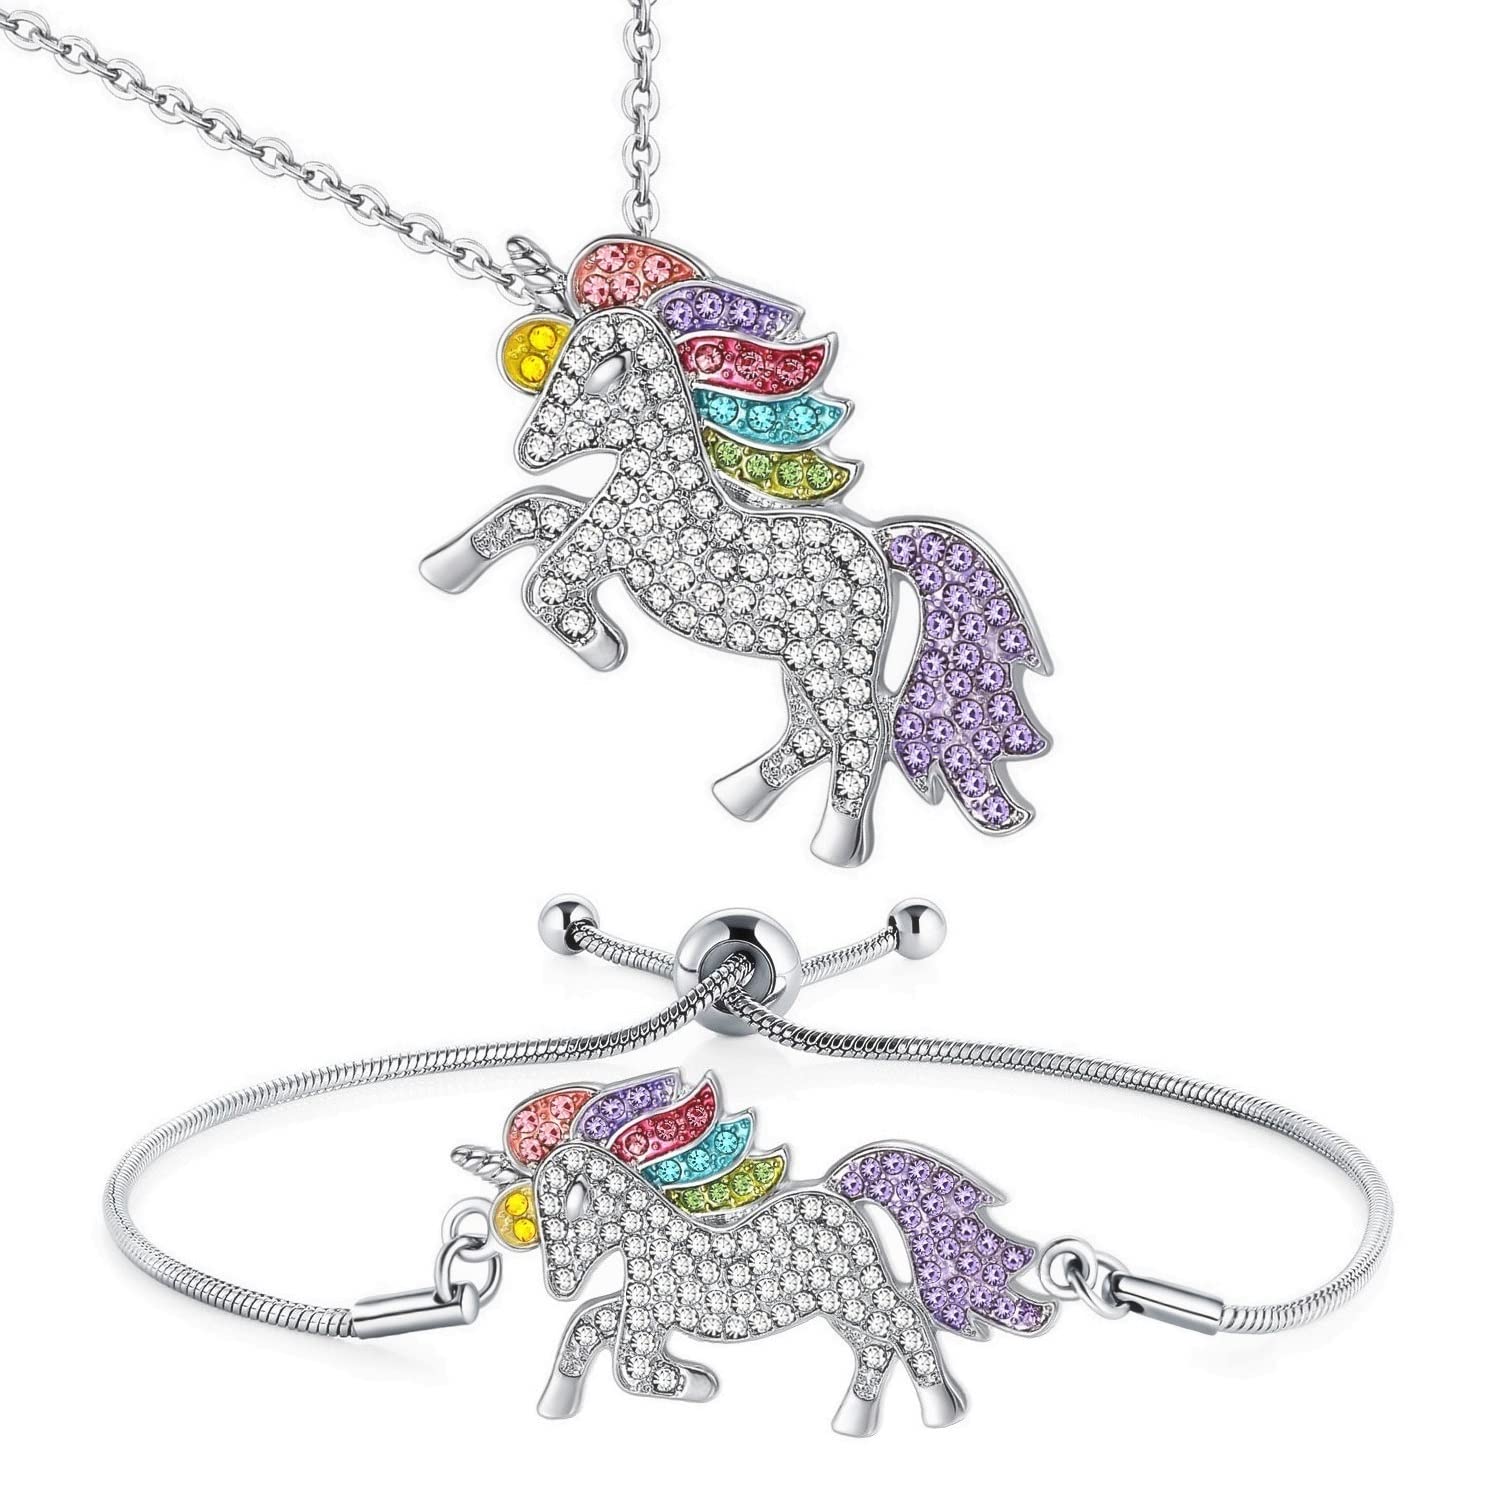 SHWIN Unicorns Gifts for Girls Kids Jewelry 2 or 4 Pack Unicorn Necklace Bracelet Earrings Ring Jewelry Set Birthday Gifts for Girls Daughter Granddaughter Niece